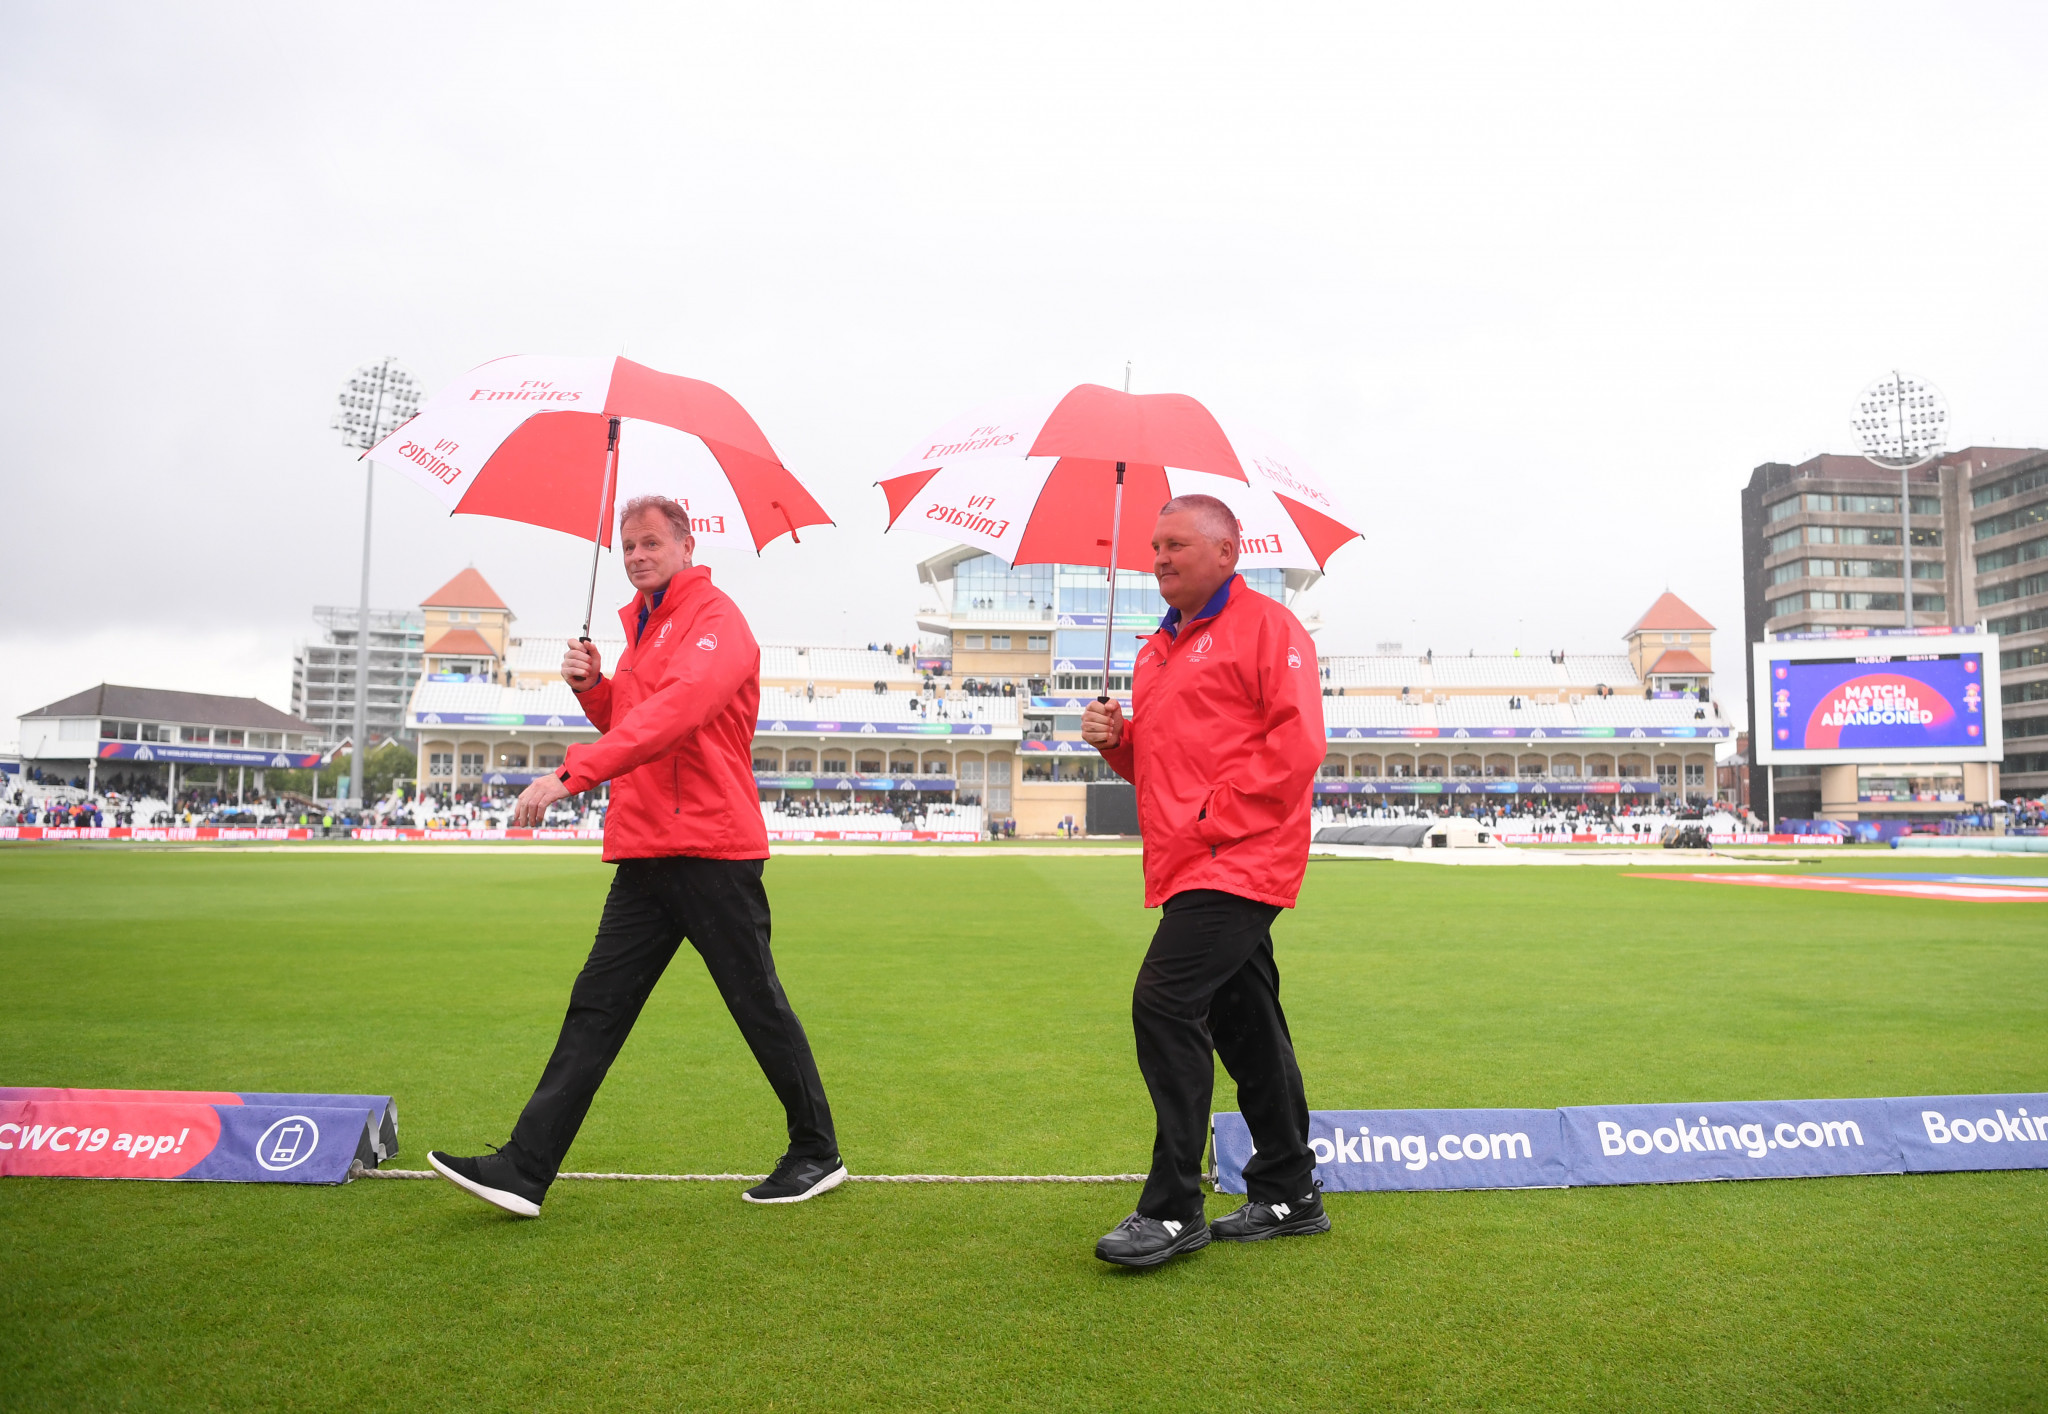 India's match with New Zealand in the ICC Cricket World Cup was called off due to rain ©Getty Images